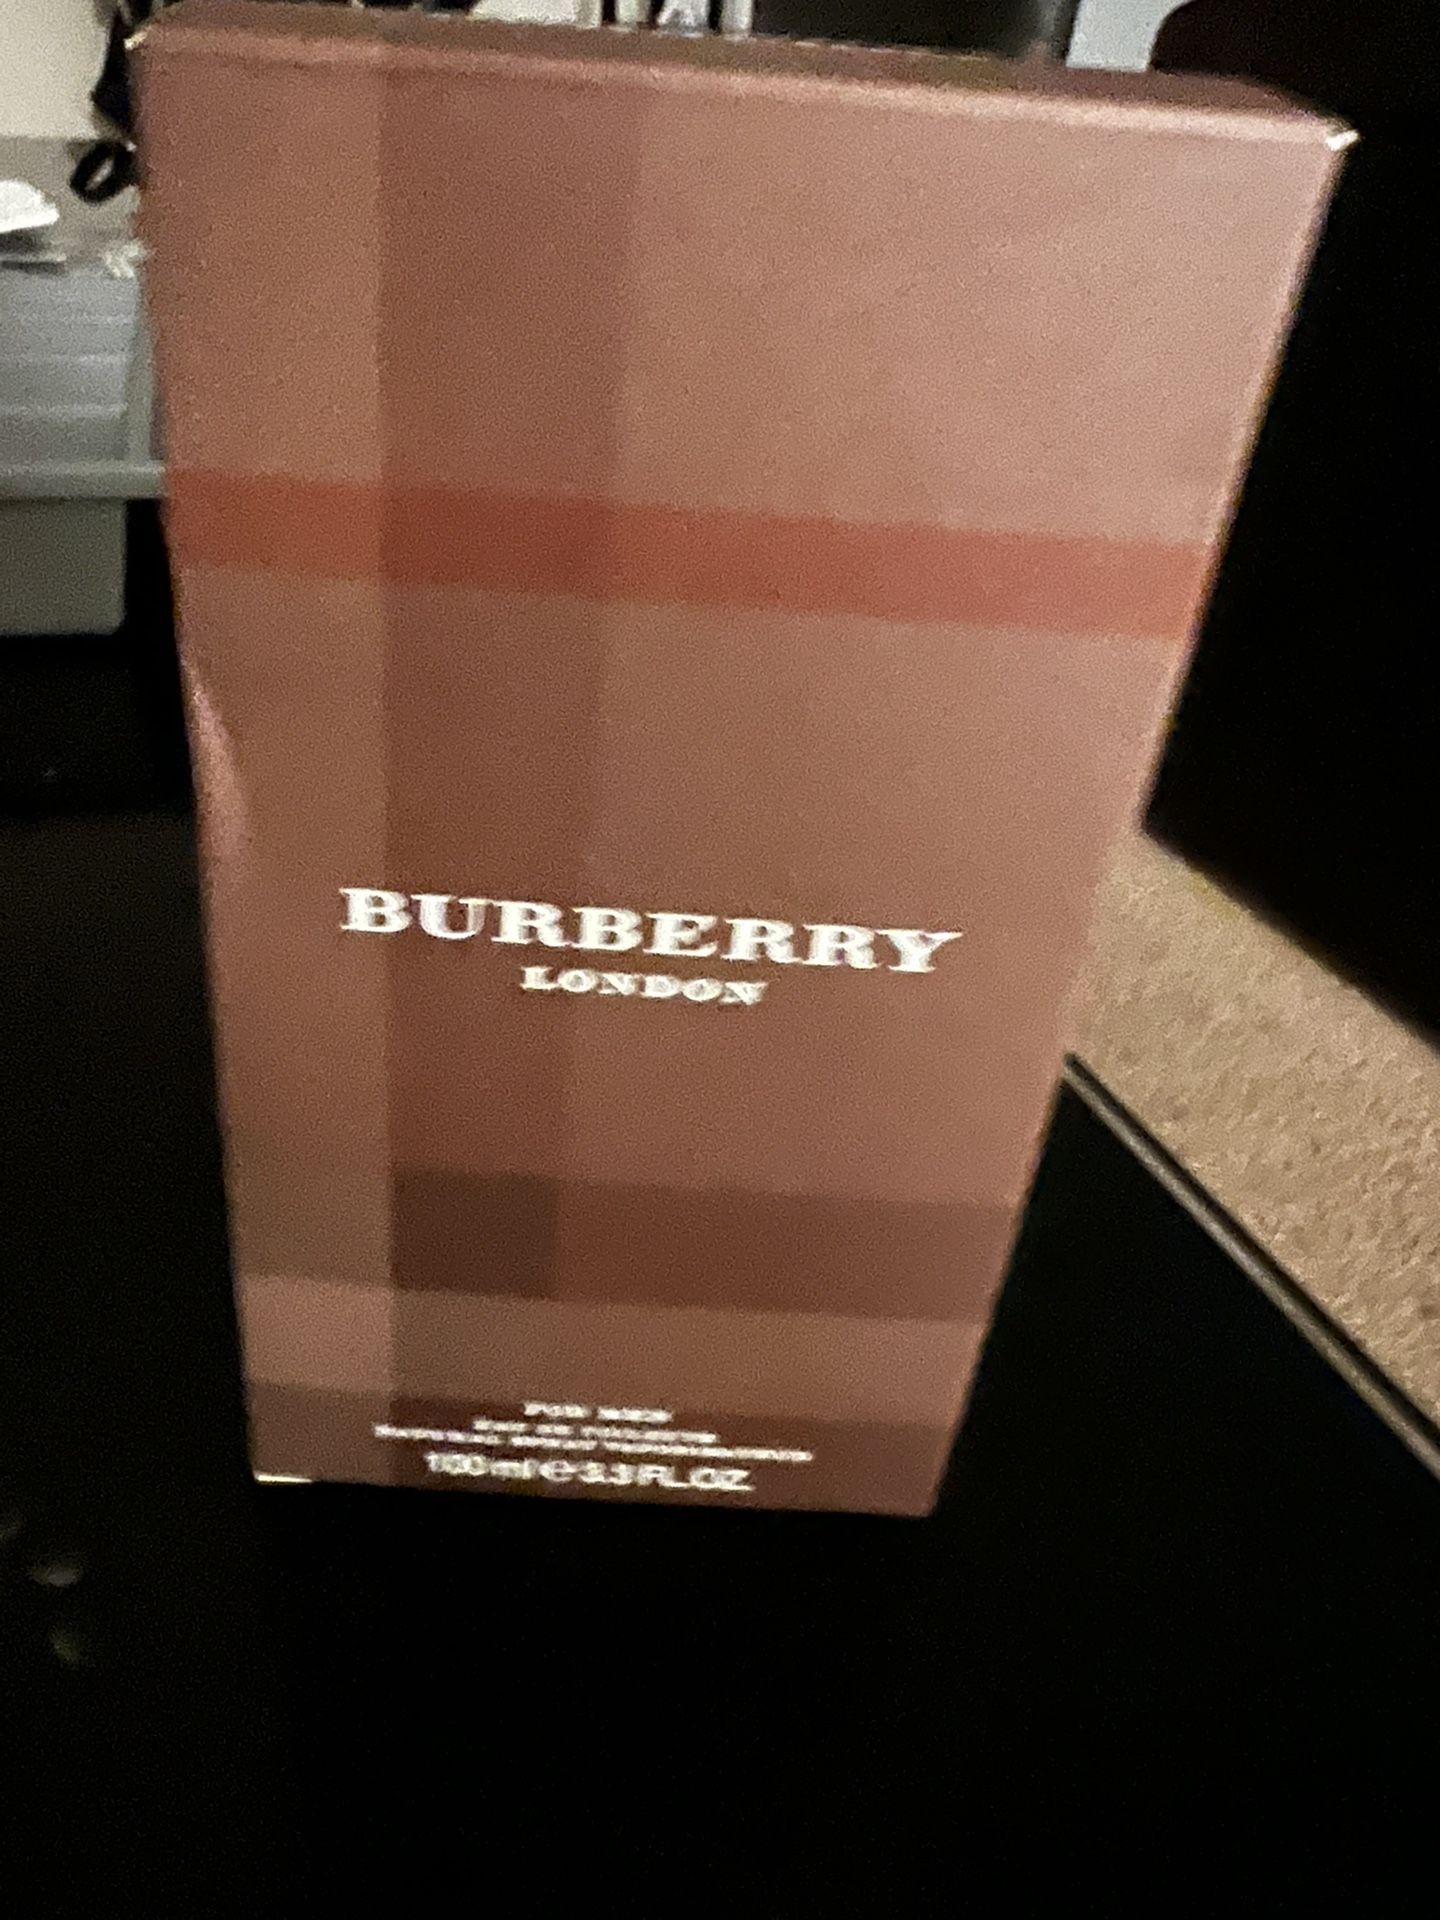 New Burberry Cologne 